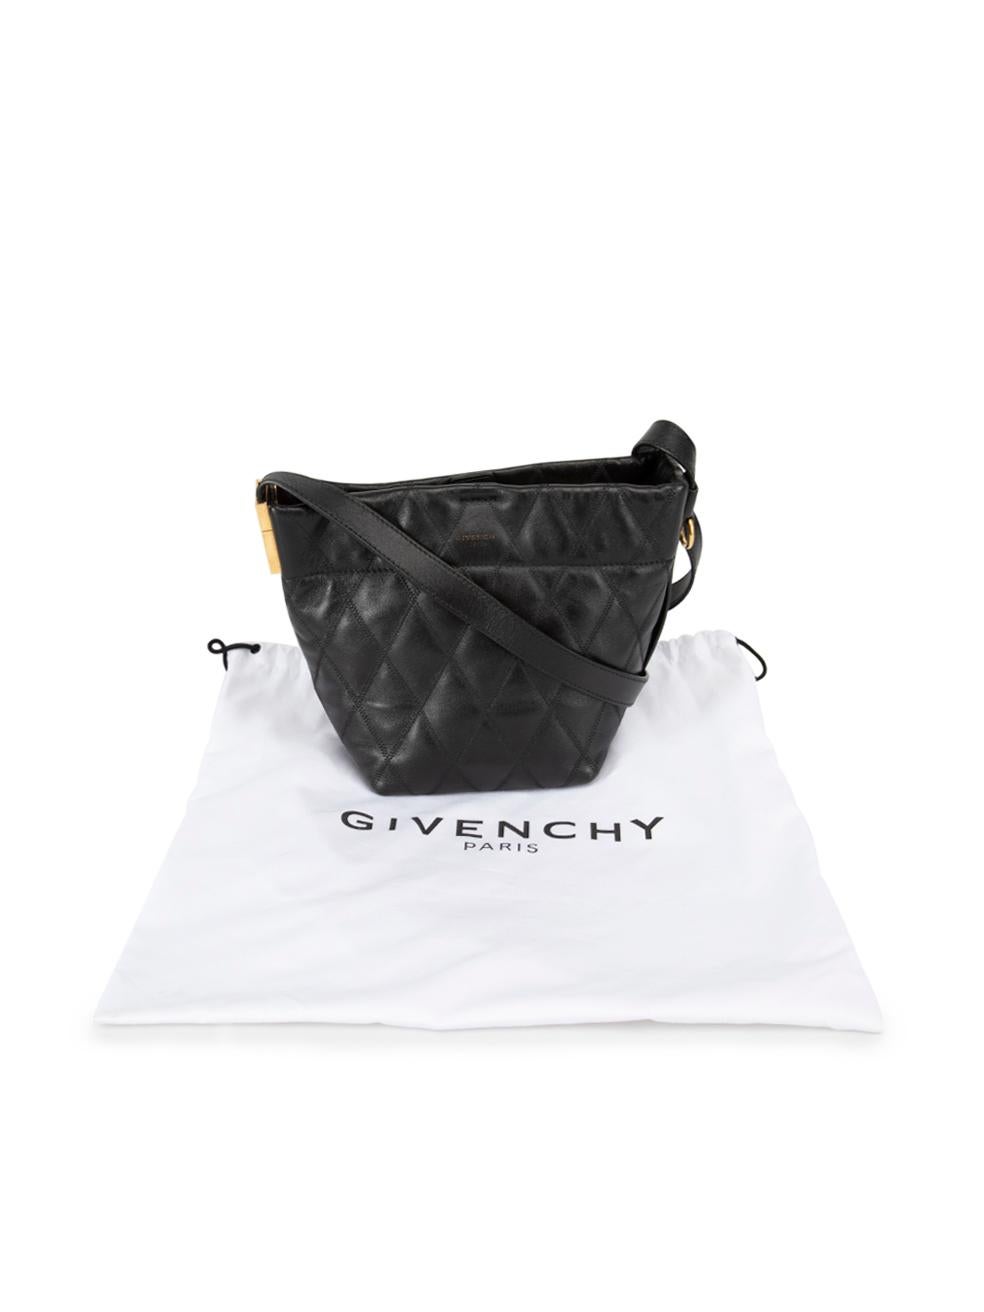 Givenchy Women's Black Leather GV Quilted Bucket Bag For Sale 4